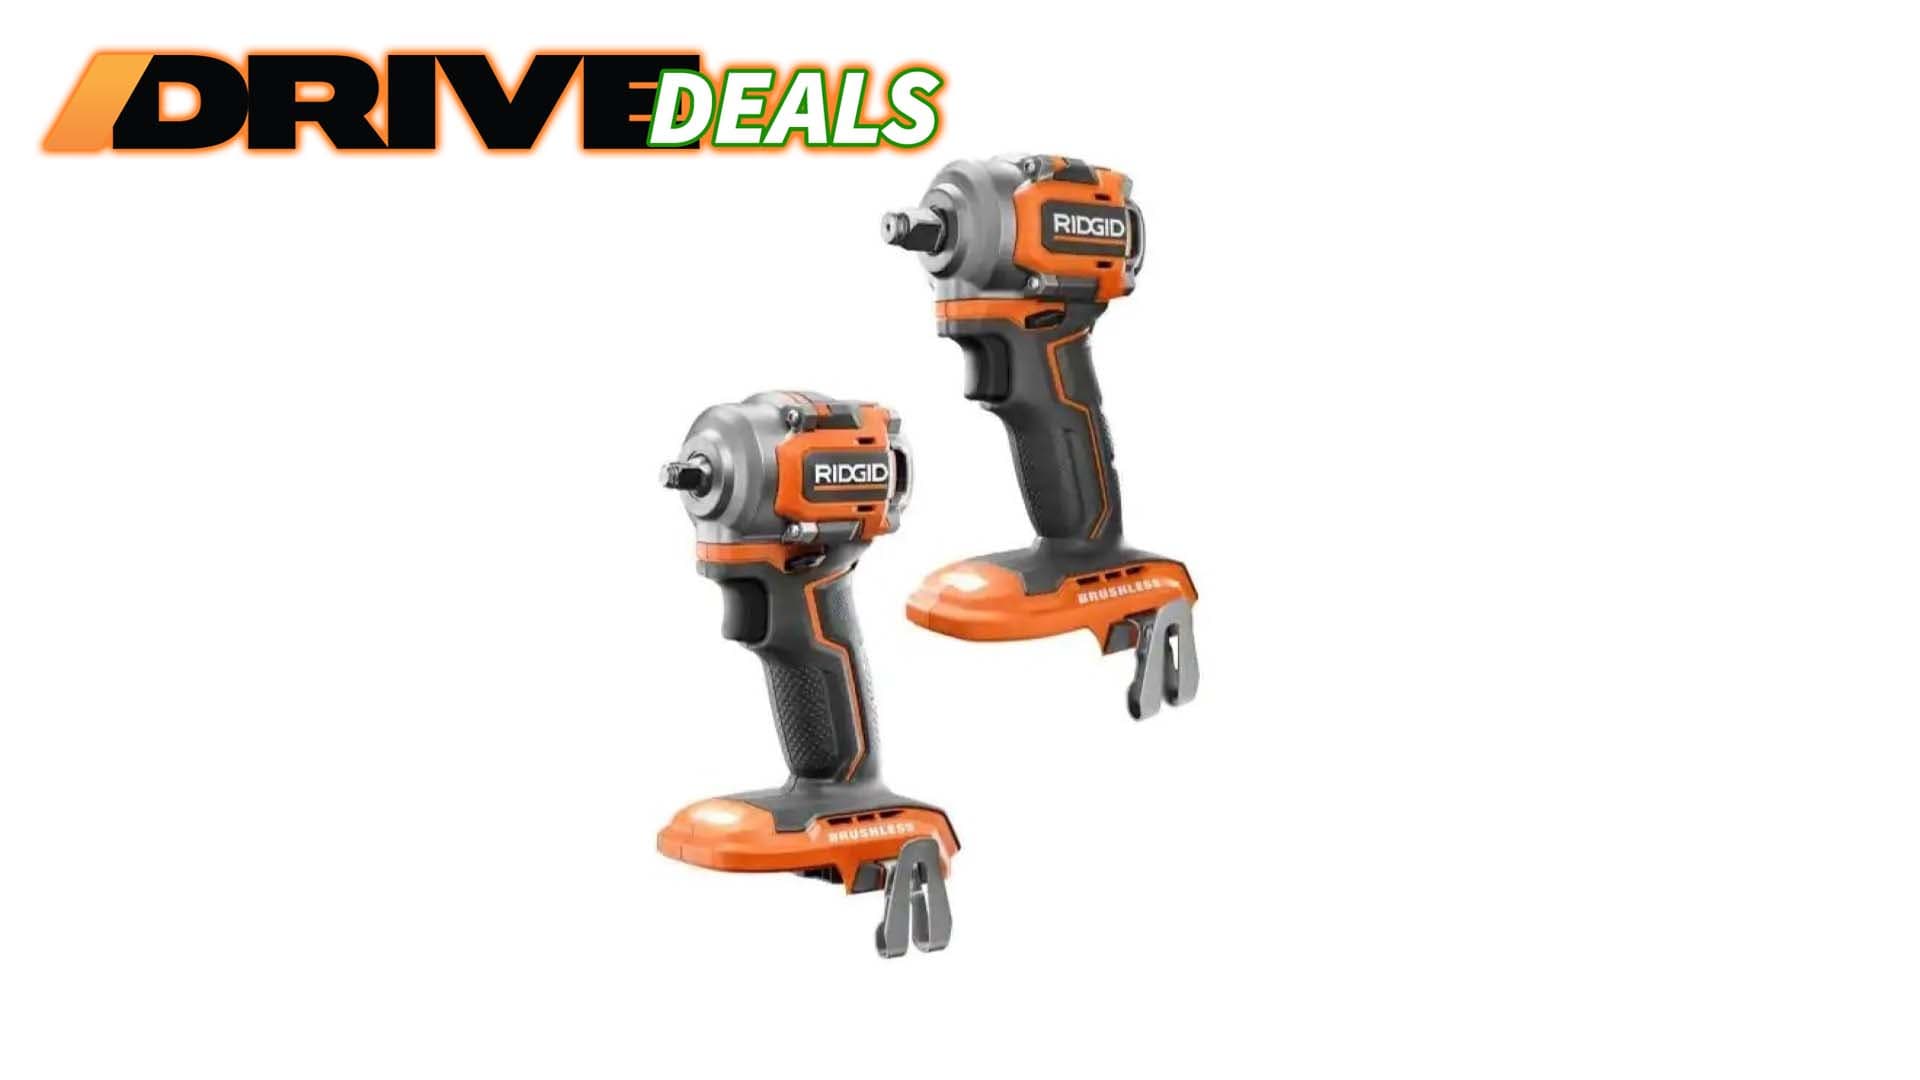 Save 39% On Rigid’s Bundle From Home Depot and Prepare for Valentine’s Day Deals